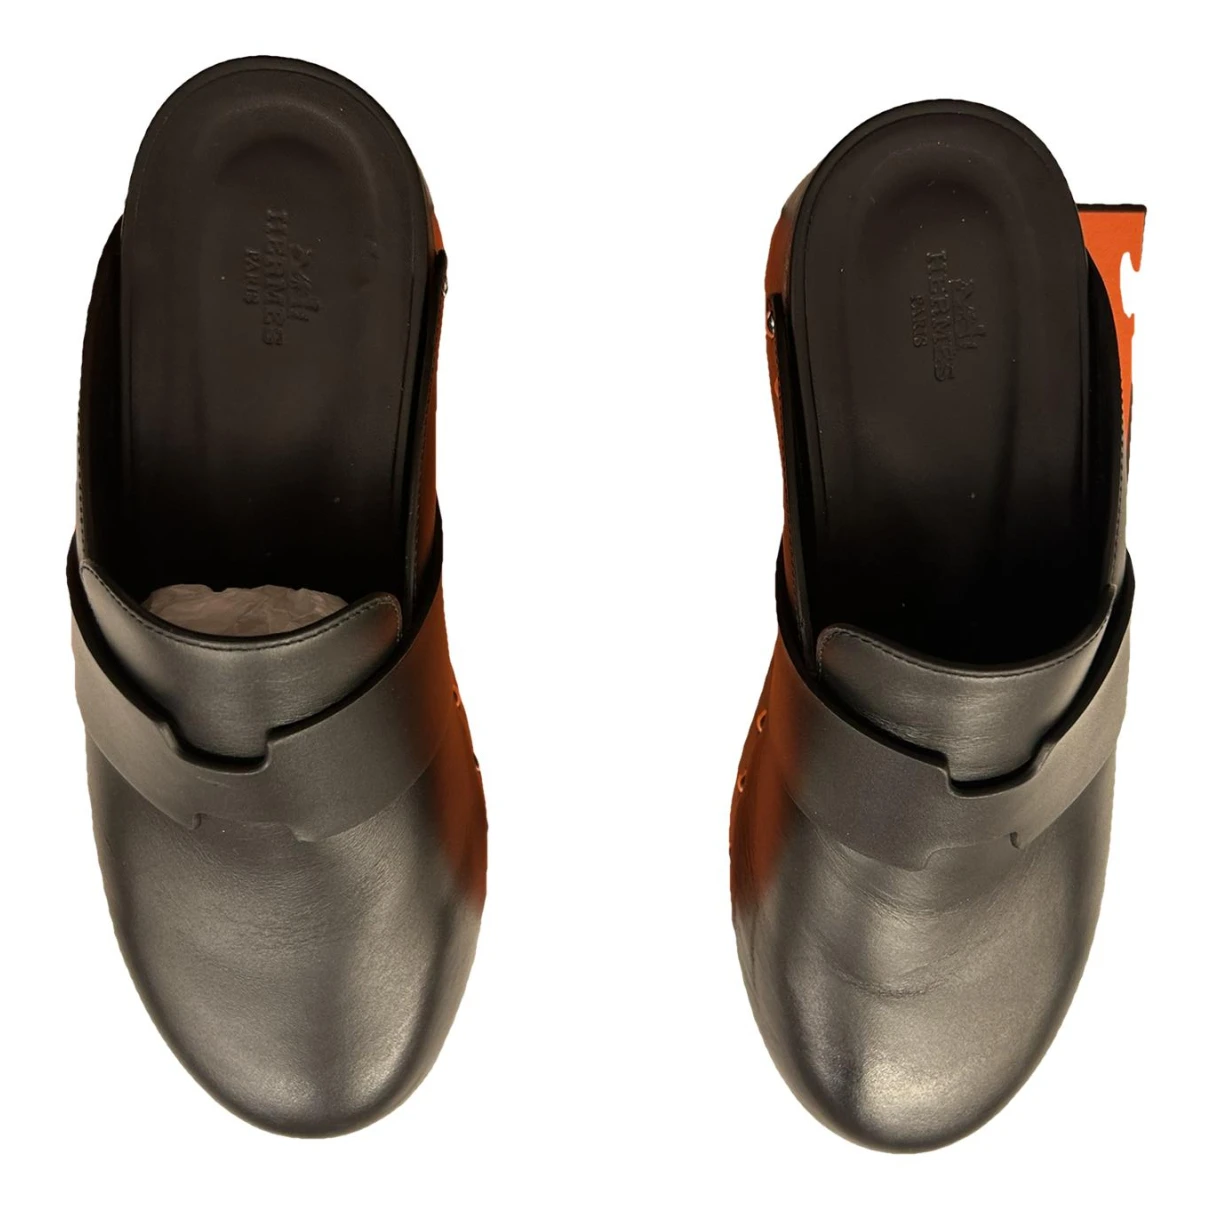 shoes Hermès mules & clogs Calya for Female Leather 39 EU. Used condition